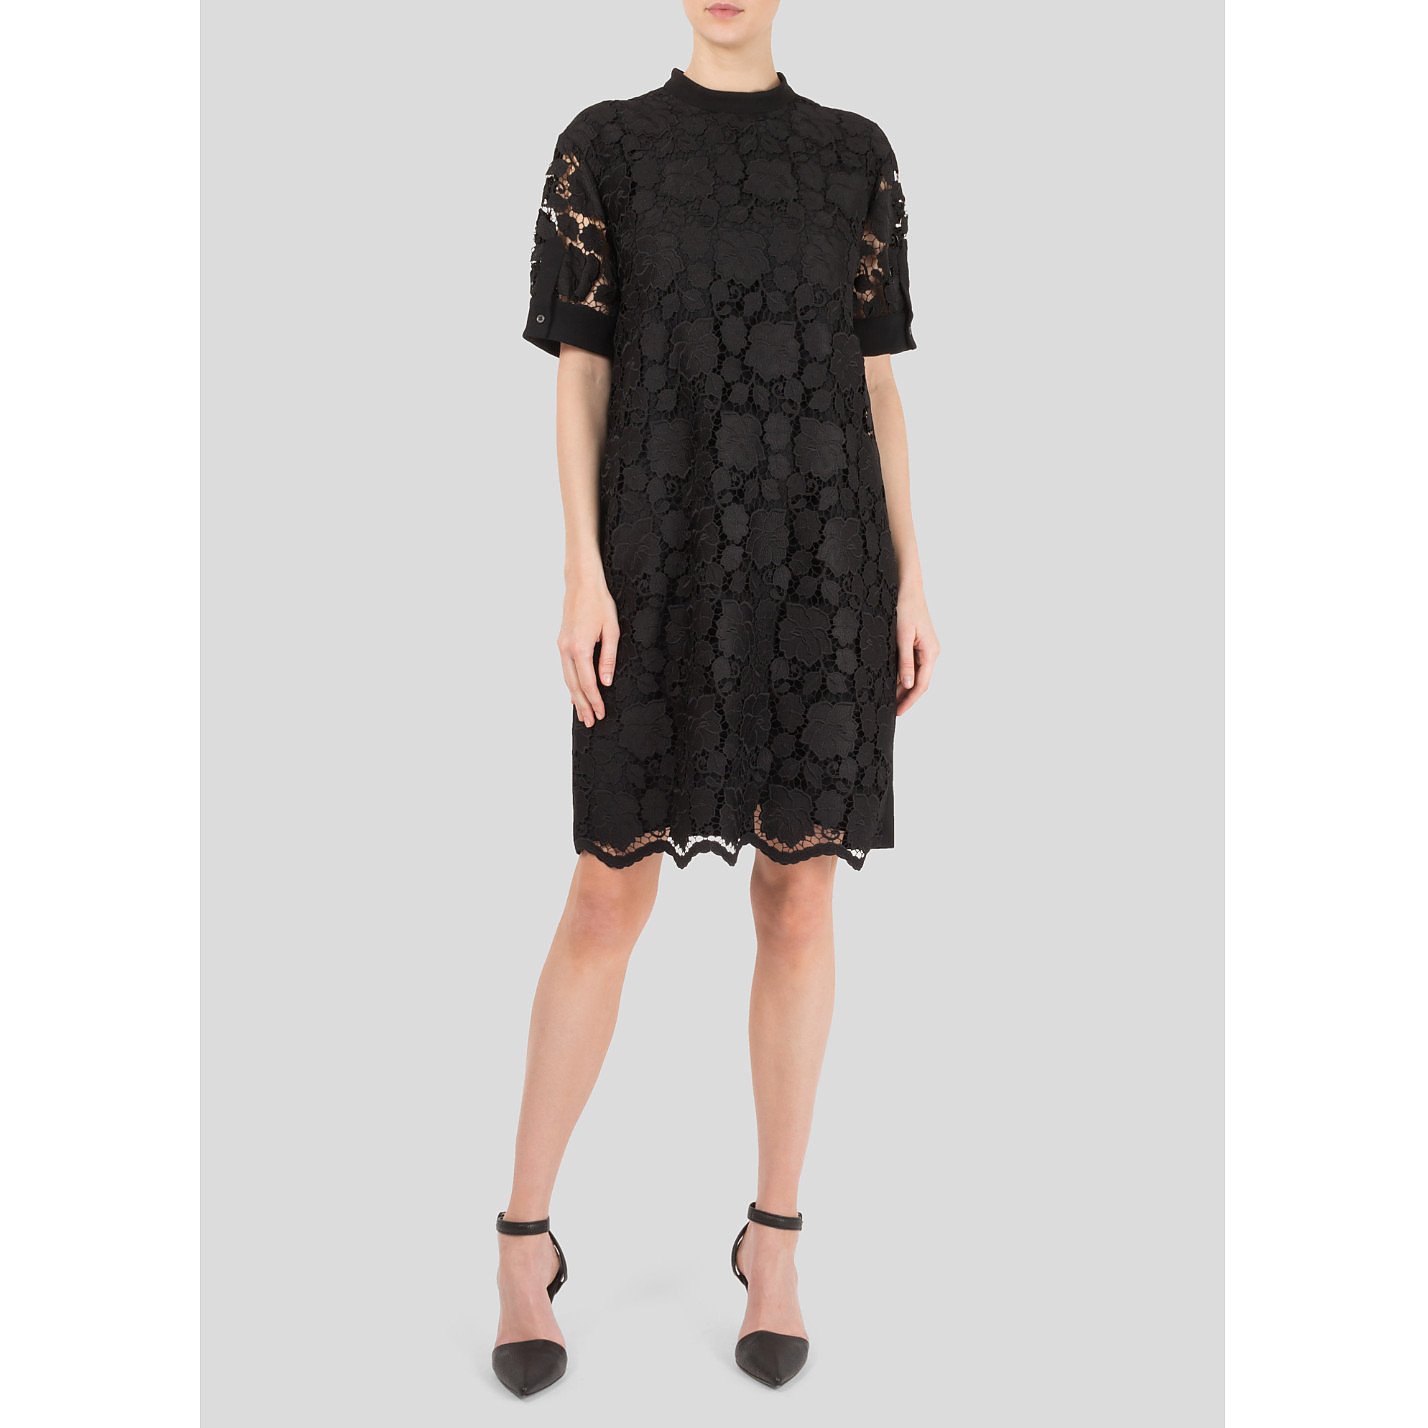 Rent Buy No.21 Floral Guipure Lace Dress | MY WARDROBE HQ